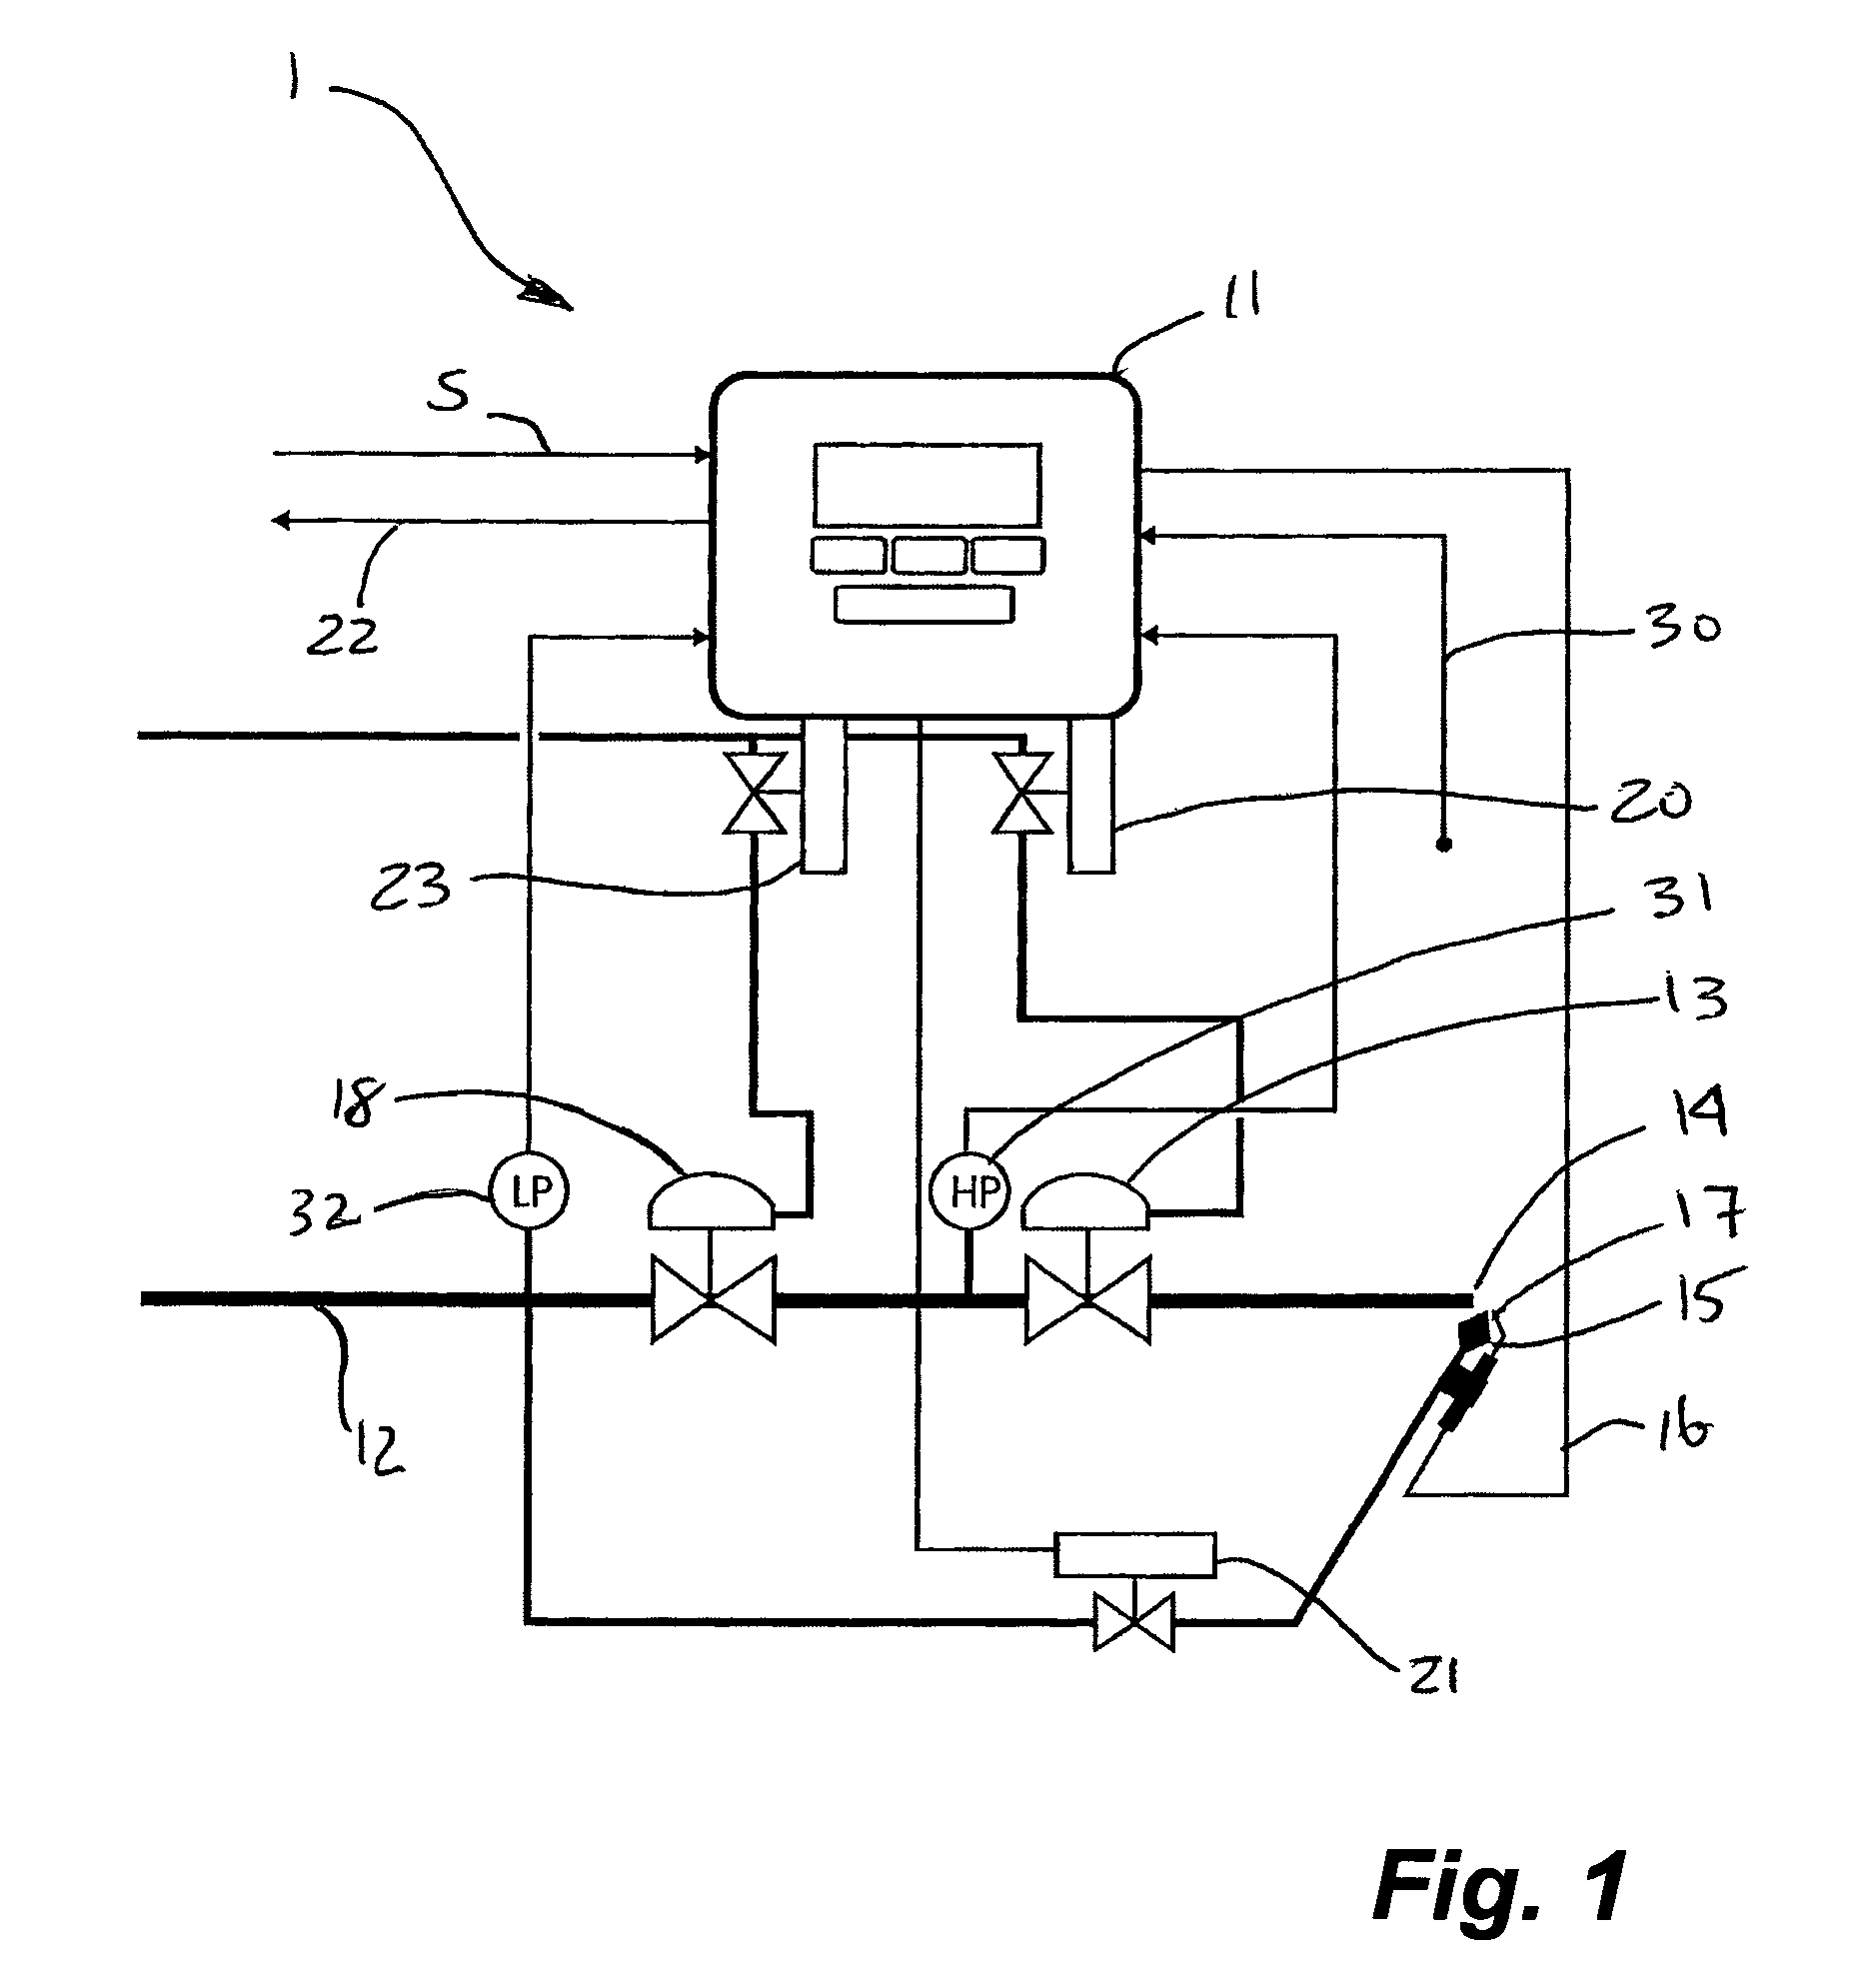 Burner ignition and control system